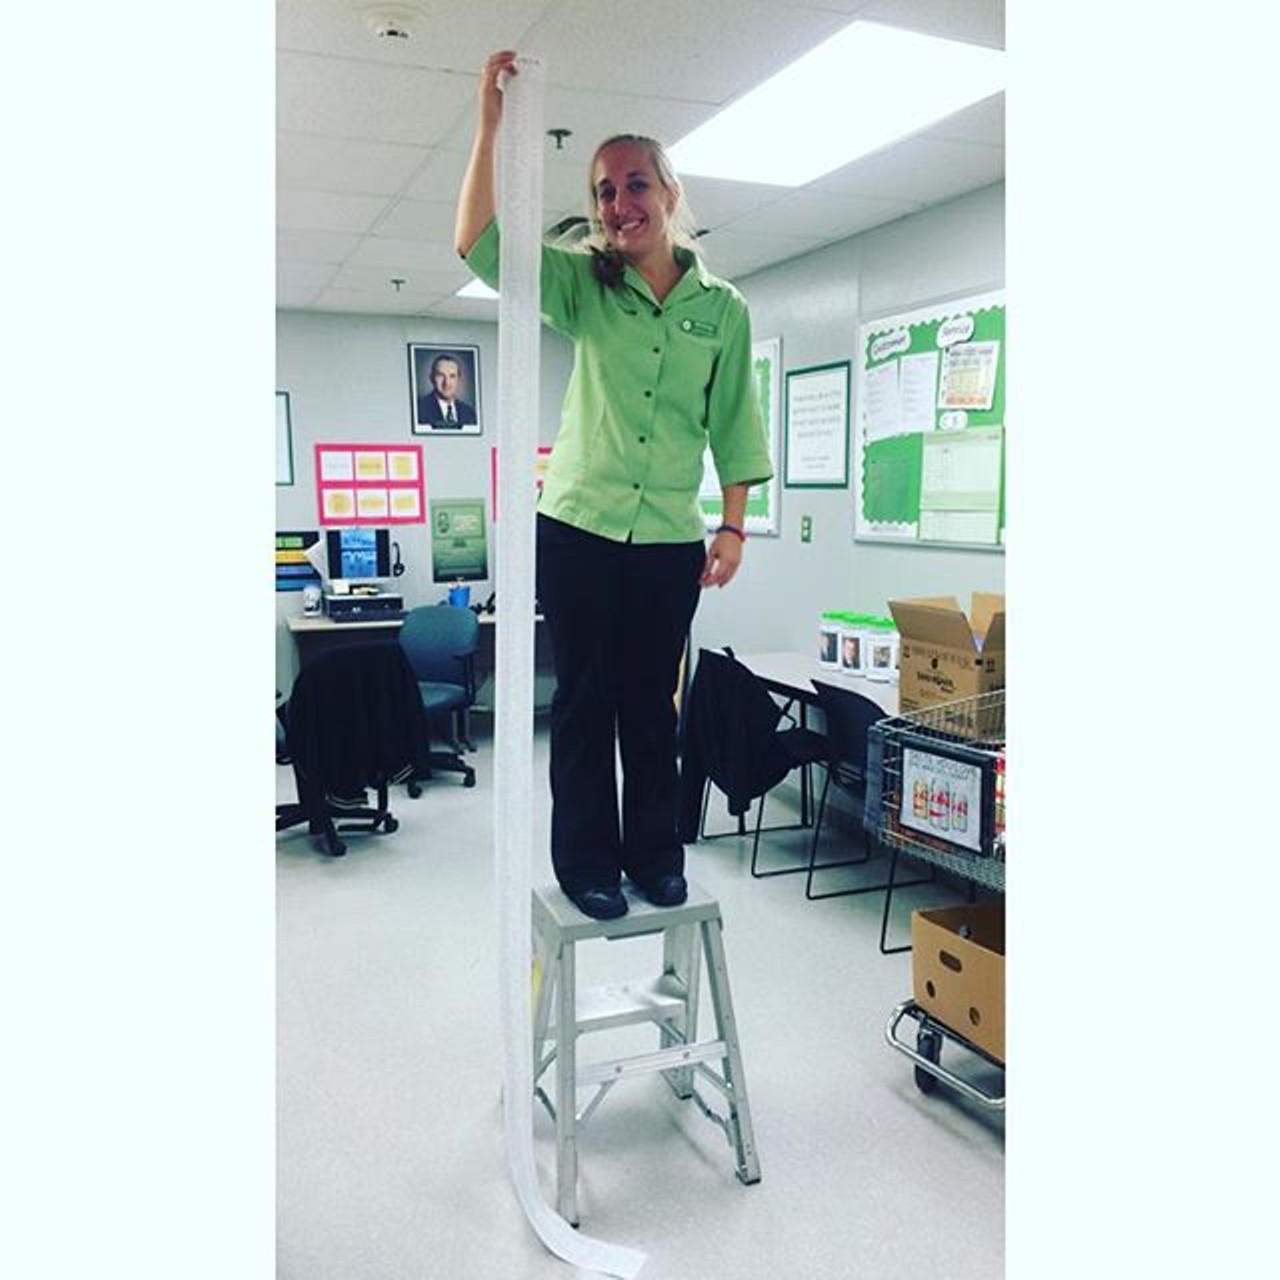 "Receipts so long you need a ladder"
Photo via Instagram user whittywhit720